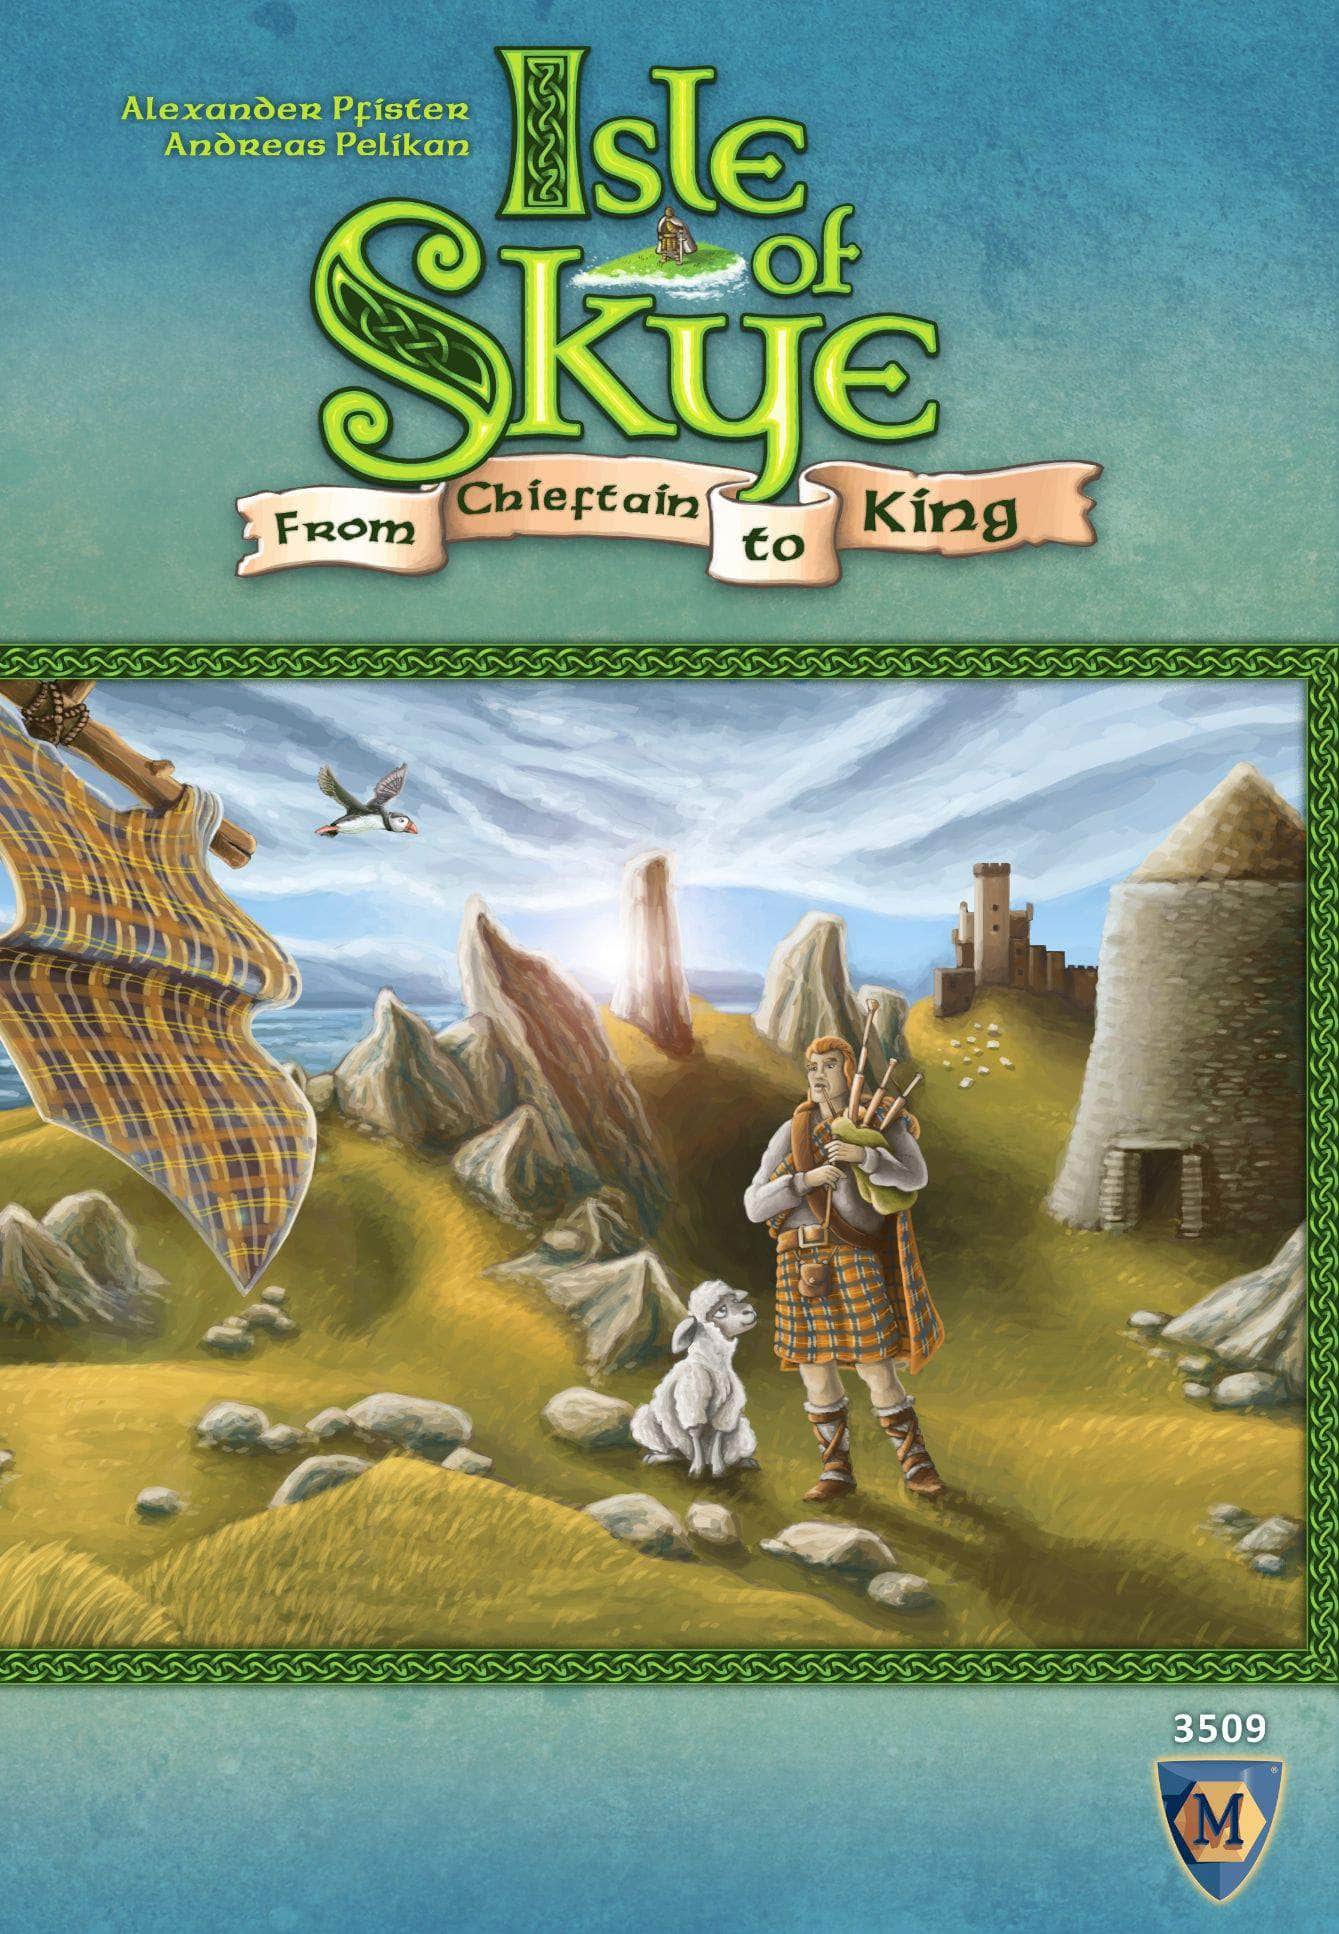 Isle of Skye: from Chieftain to King (Retail Edition) Retail Board Game Lookout Games, 999 Games, Albi, Compaya.hu - Gamer Café Kft., Funforge, GoKids ????, Hobby Japan, Hobby World, Kaissa Chess & Games, Lacerta, Ludicus, Mayfair Games, PaperGames (III), SD Games, uplay.it edizioni, Zhiyanjia KS800461A